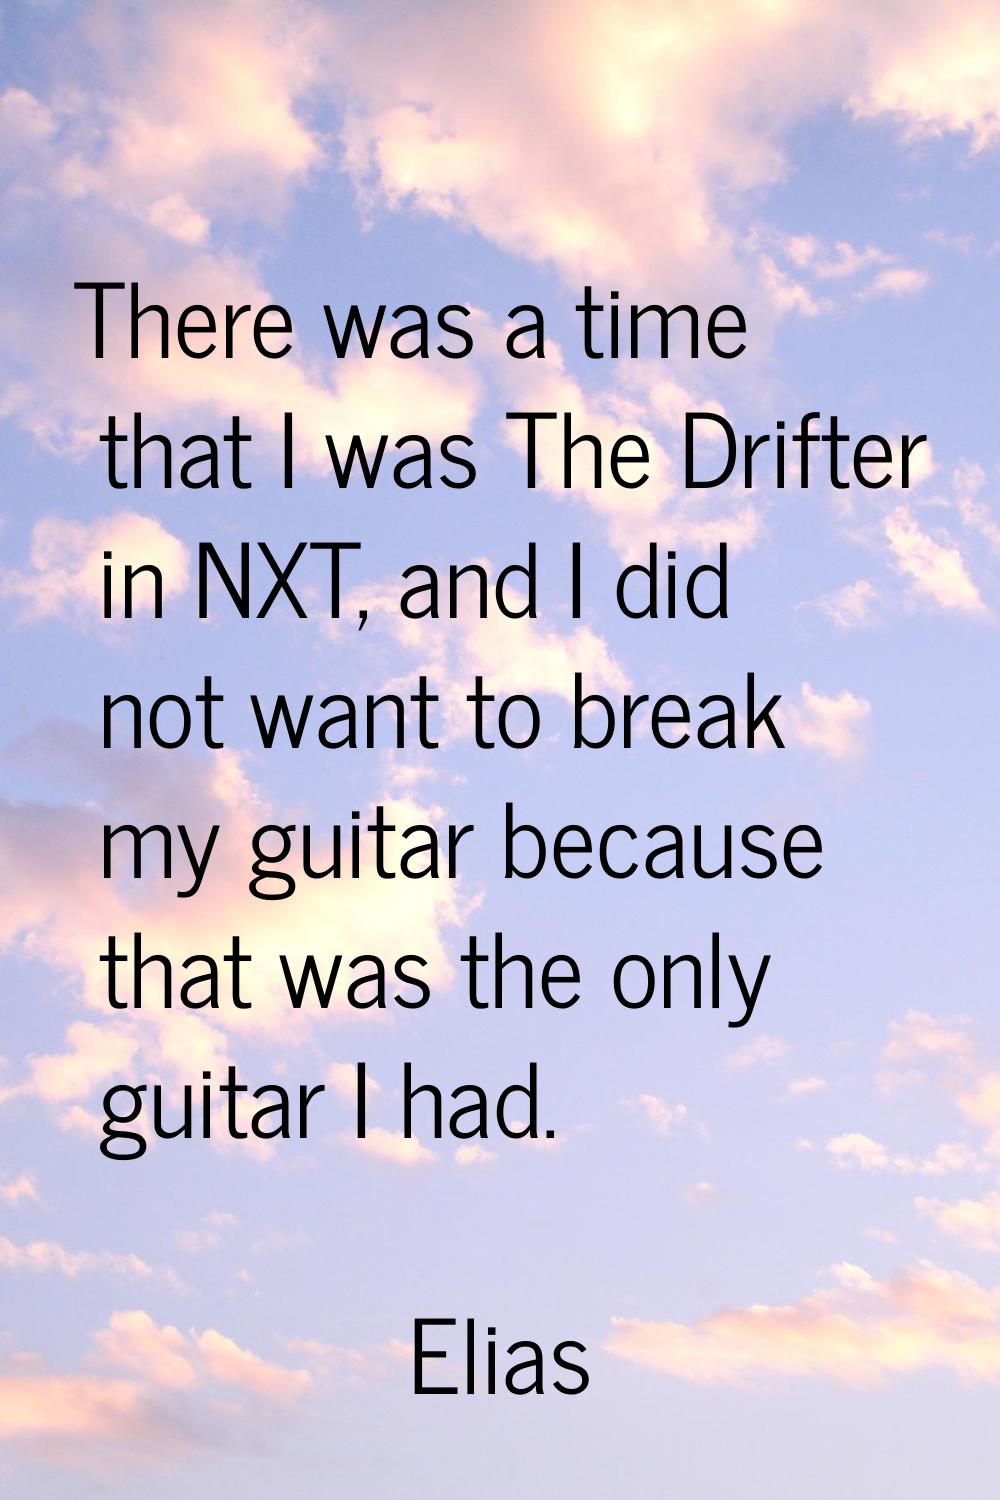 There was a time that I was The Drifter in NXT, and I did not want to break my guitar because that 